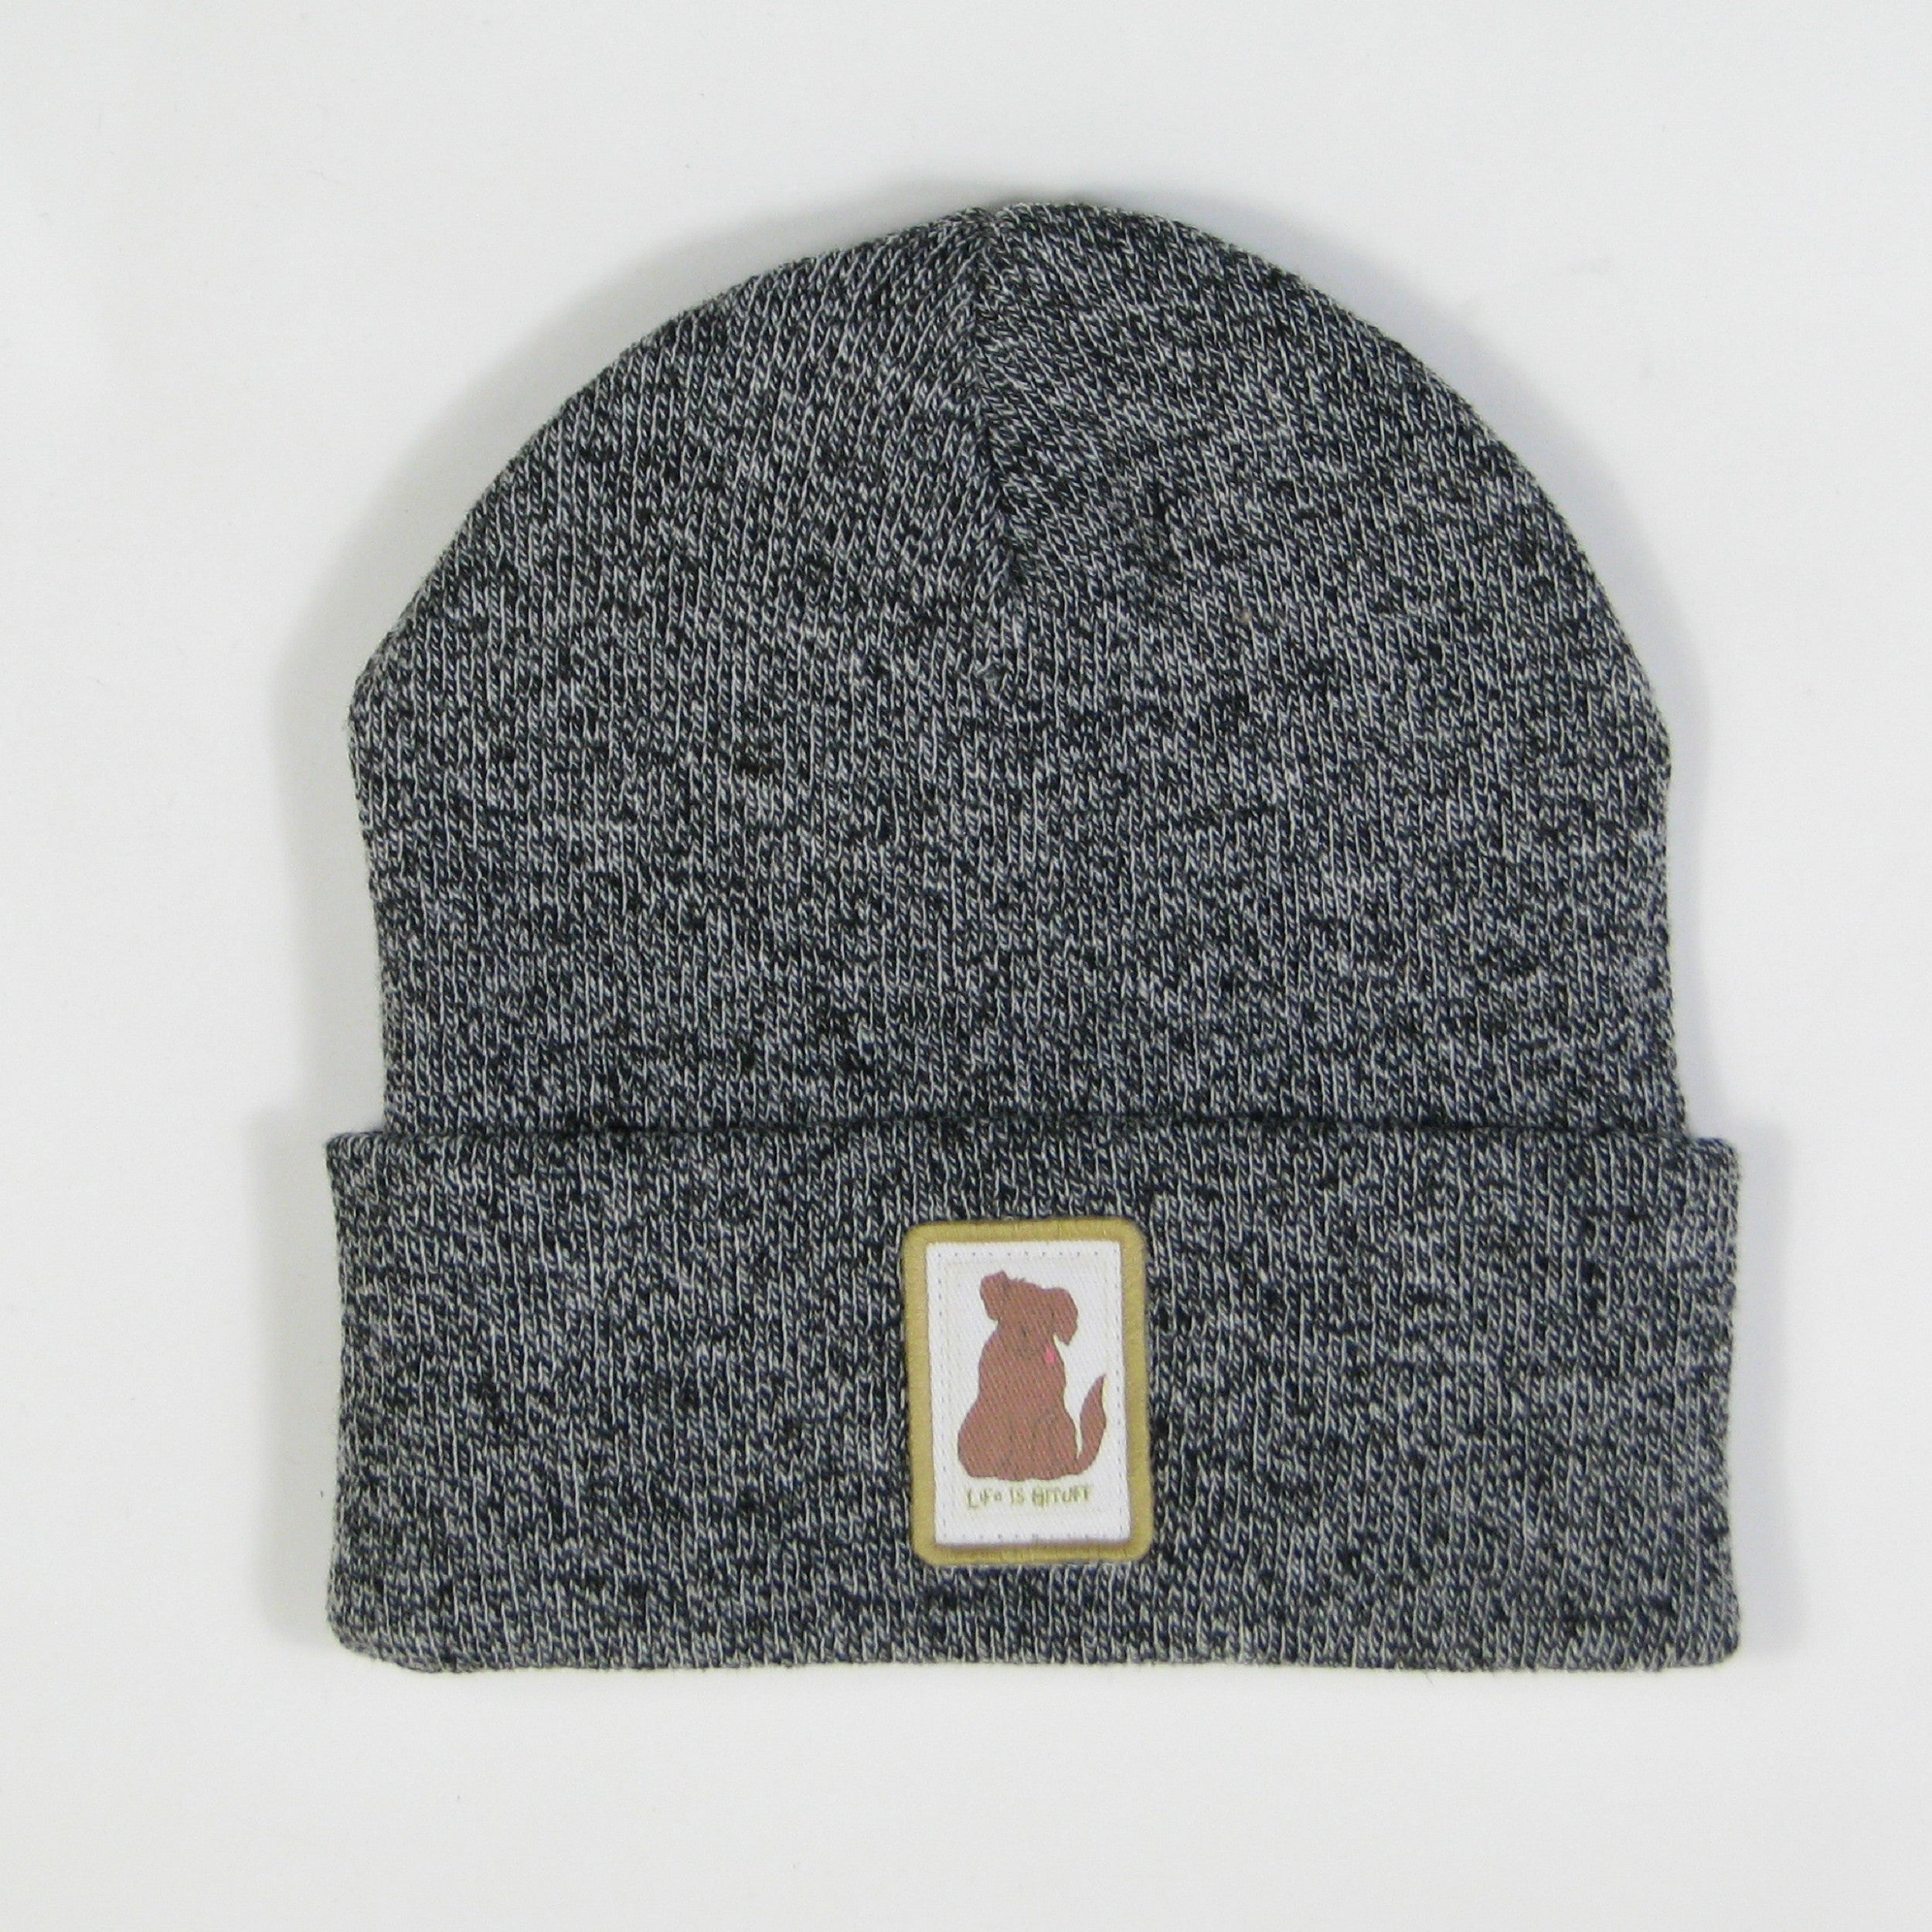 LIG Beanie Marled Cuff Dog available in 3 colors